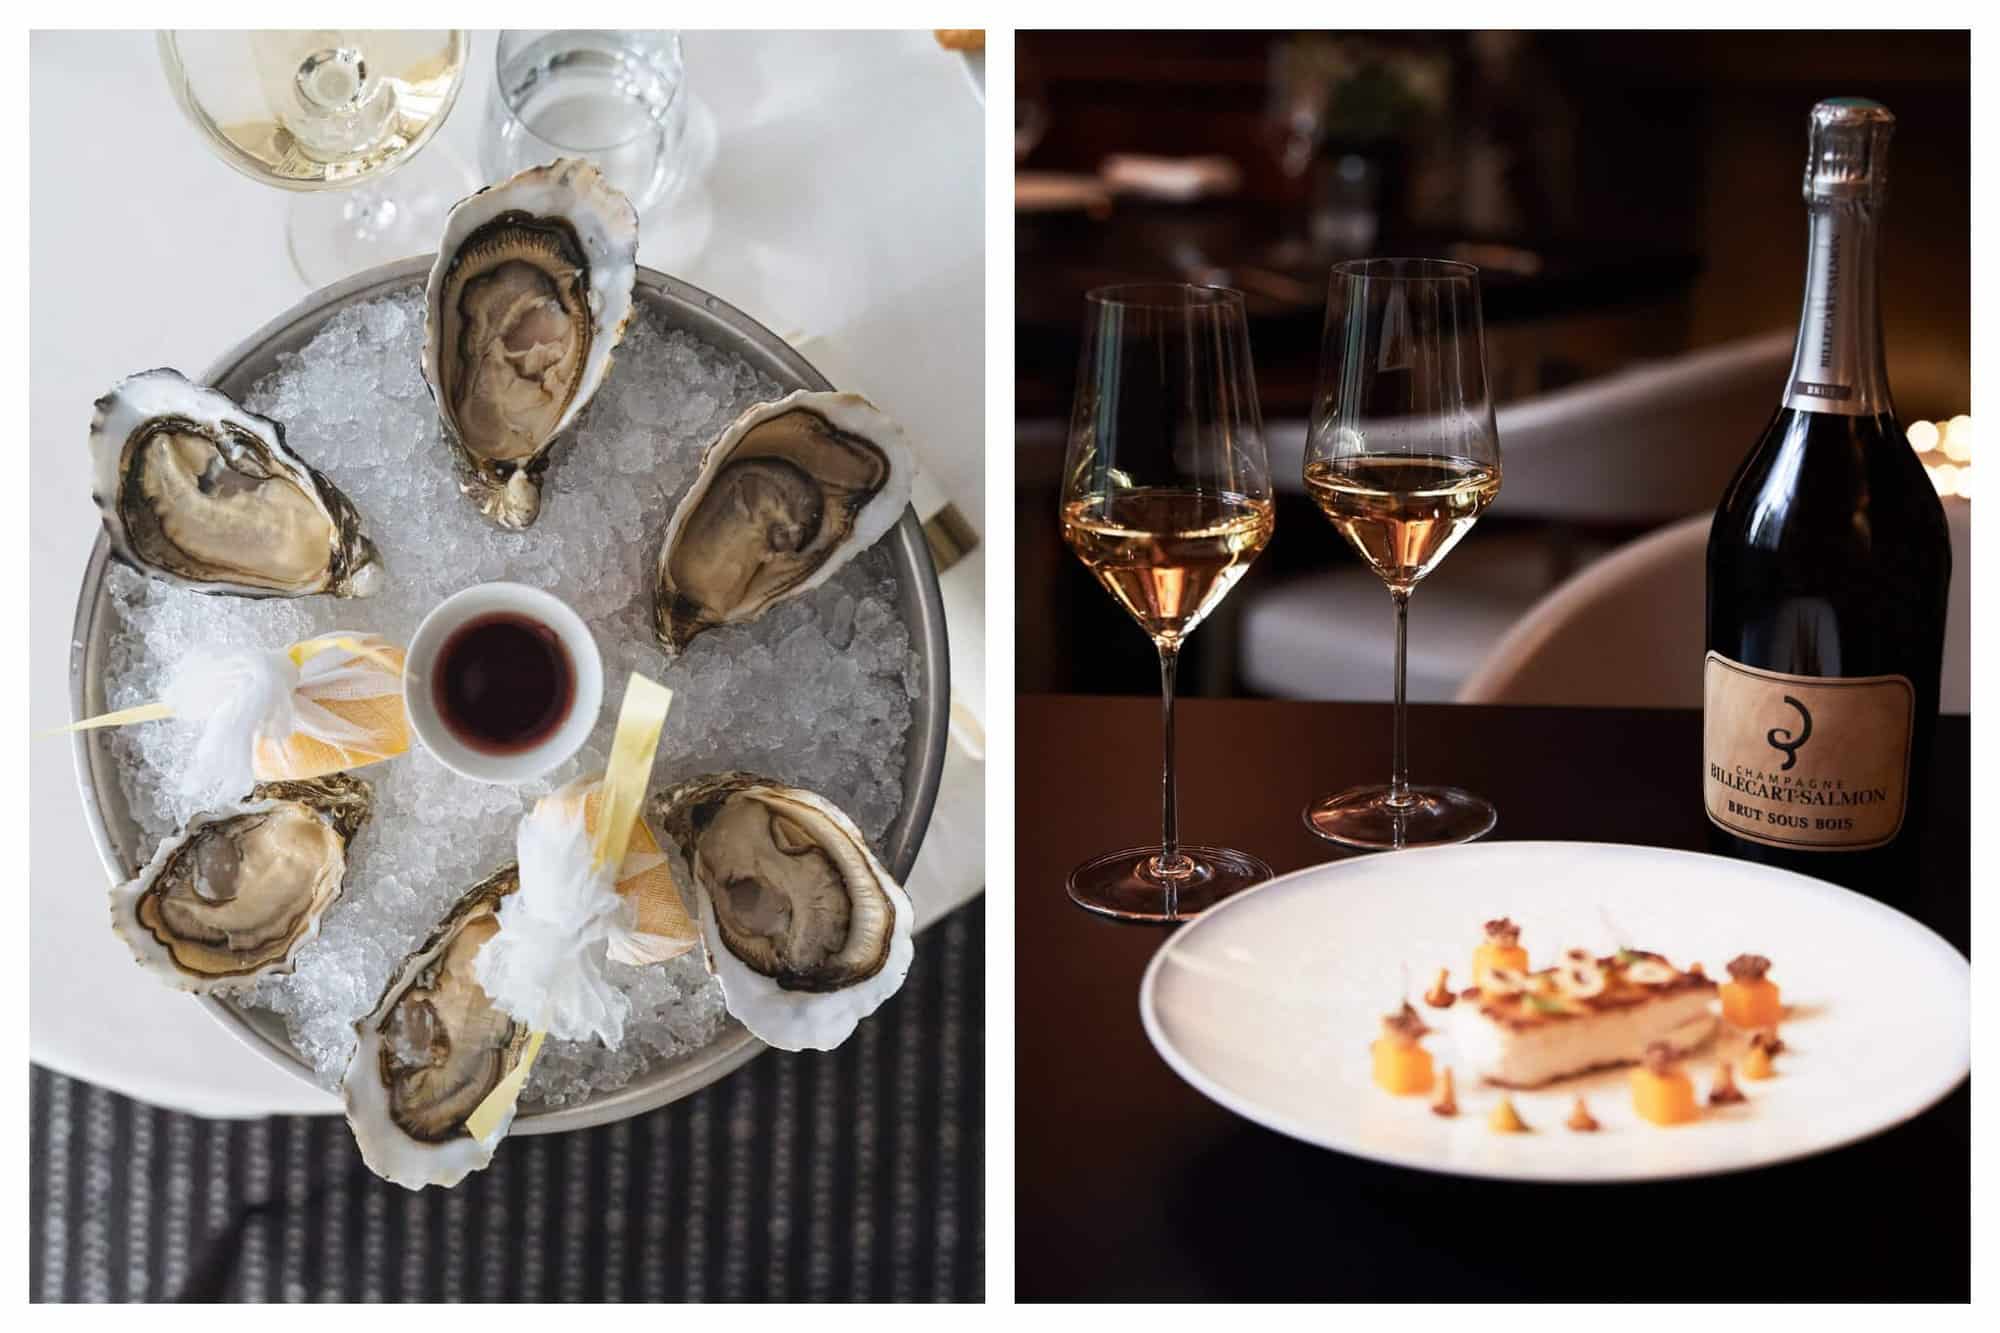 Left: an aerial view of a platter of oysters in ice. There is a sauce in the center of the platter and a glass filled with white wine is visible at the top of the frame. Right: a white plate with food with two wine glasses filled with rosé champagne next to a bottle of Billecart Simon champagne on a wooden table. The glasses and the bottle are in focus and the plate is not.